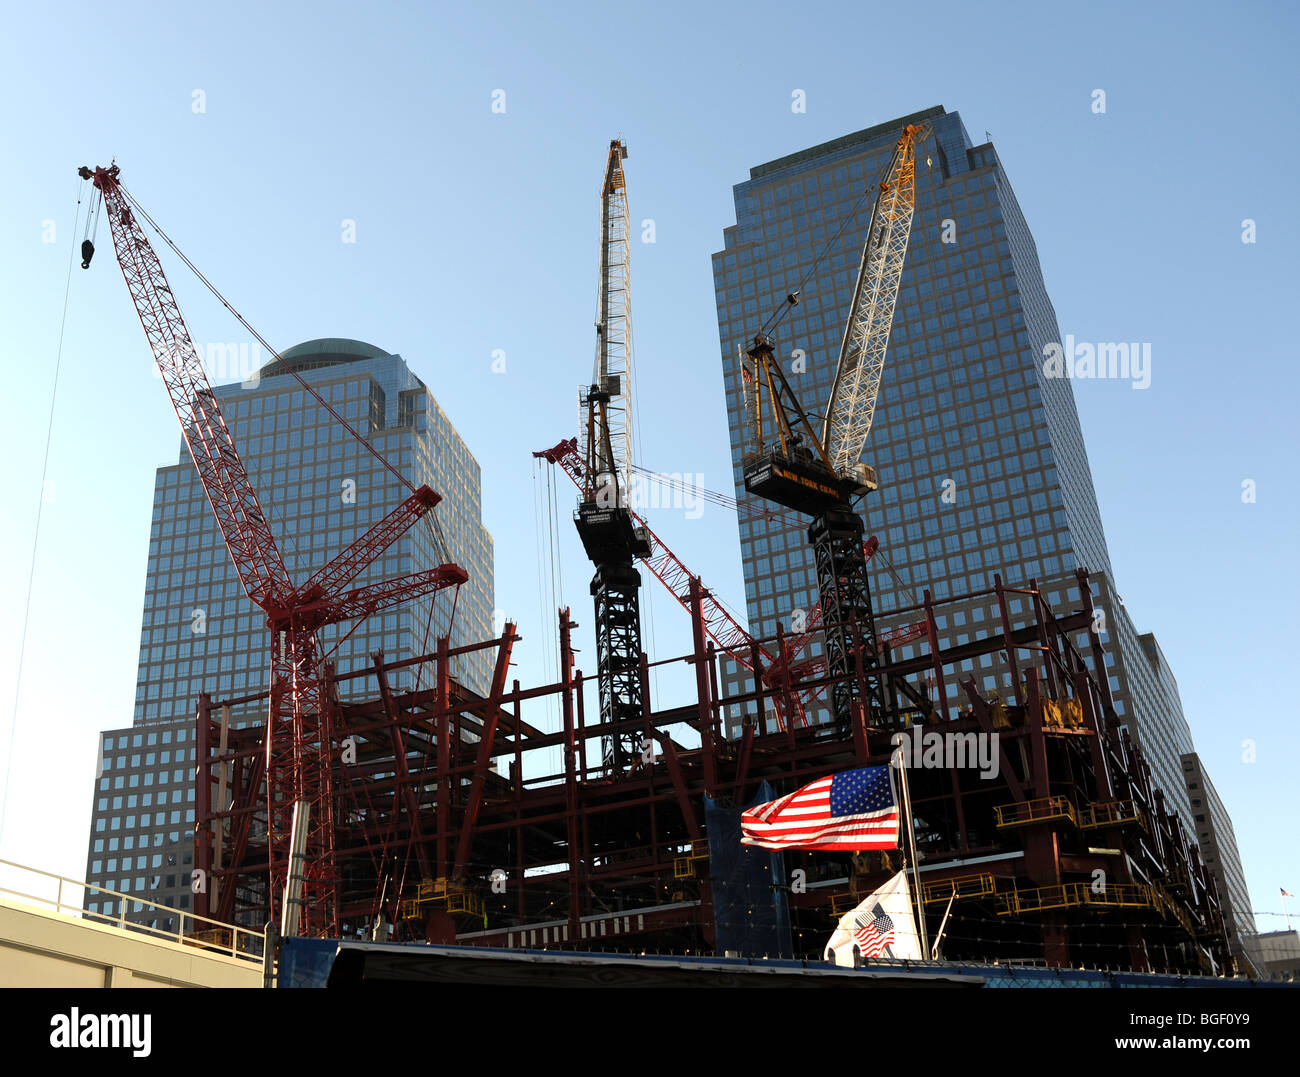 The sight of the Twin Towers World Trade Center 9/11 terrorist attack in Manhattan New York USA - photo by Simon Dack Stock Photo